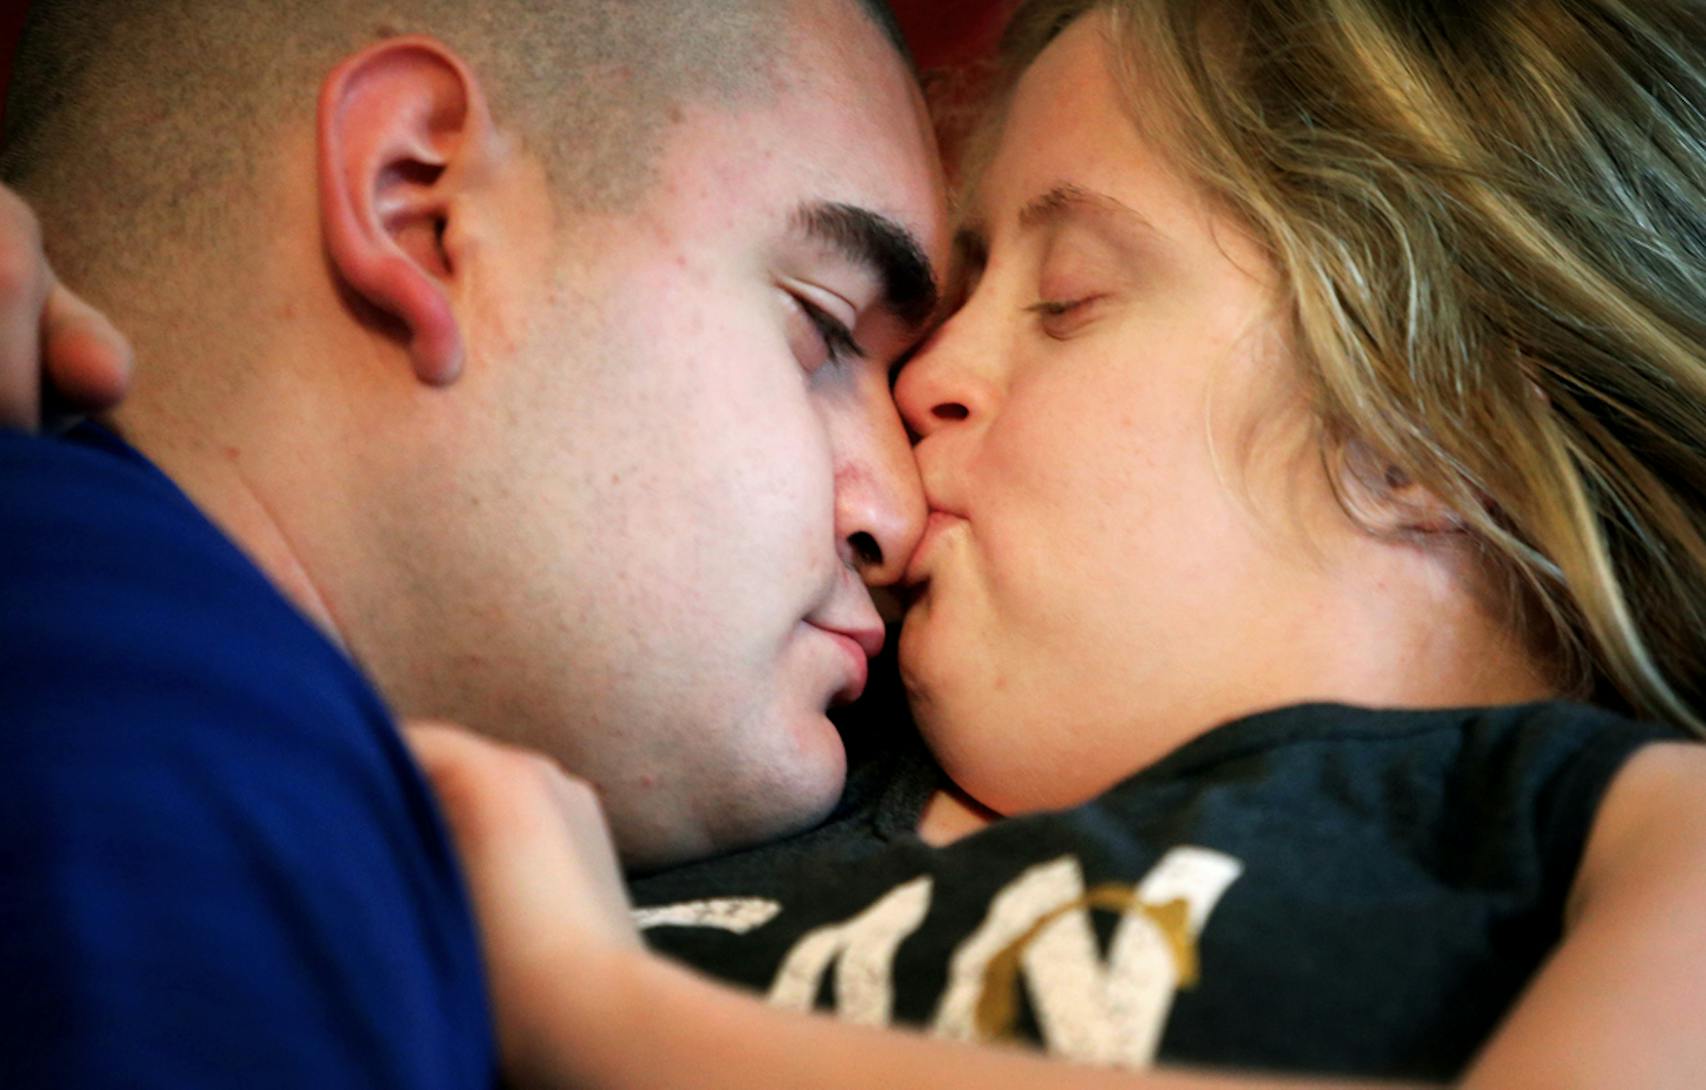 Rachel Larson, 21, and Nicholas Hamilton, 24, who have developmental disabilities, have been dating about a year, and both have the support of their families. Romance sometimes seems impossible to Minnesotans with disabilities.